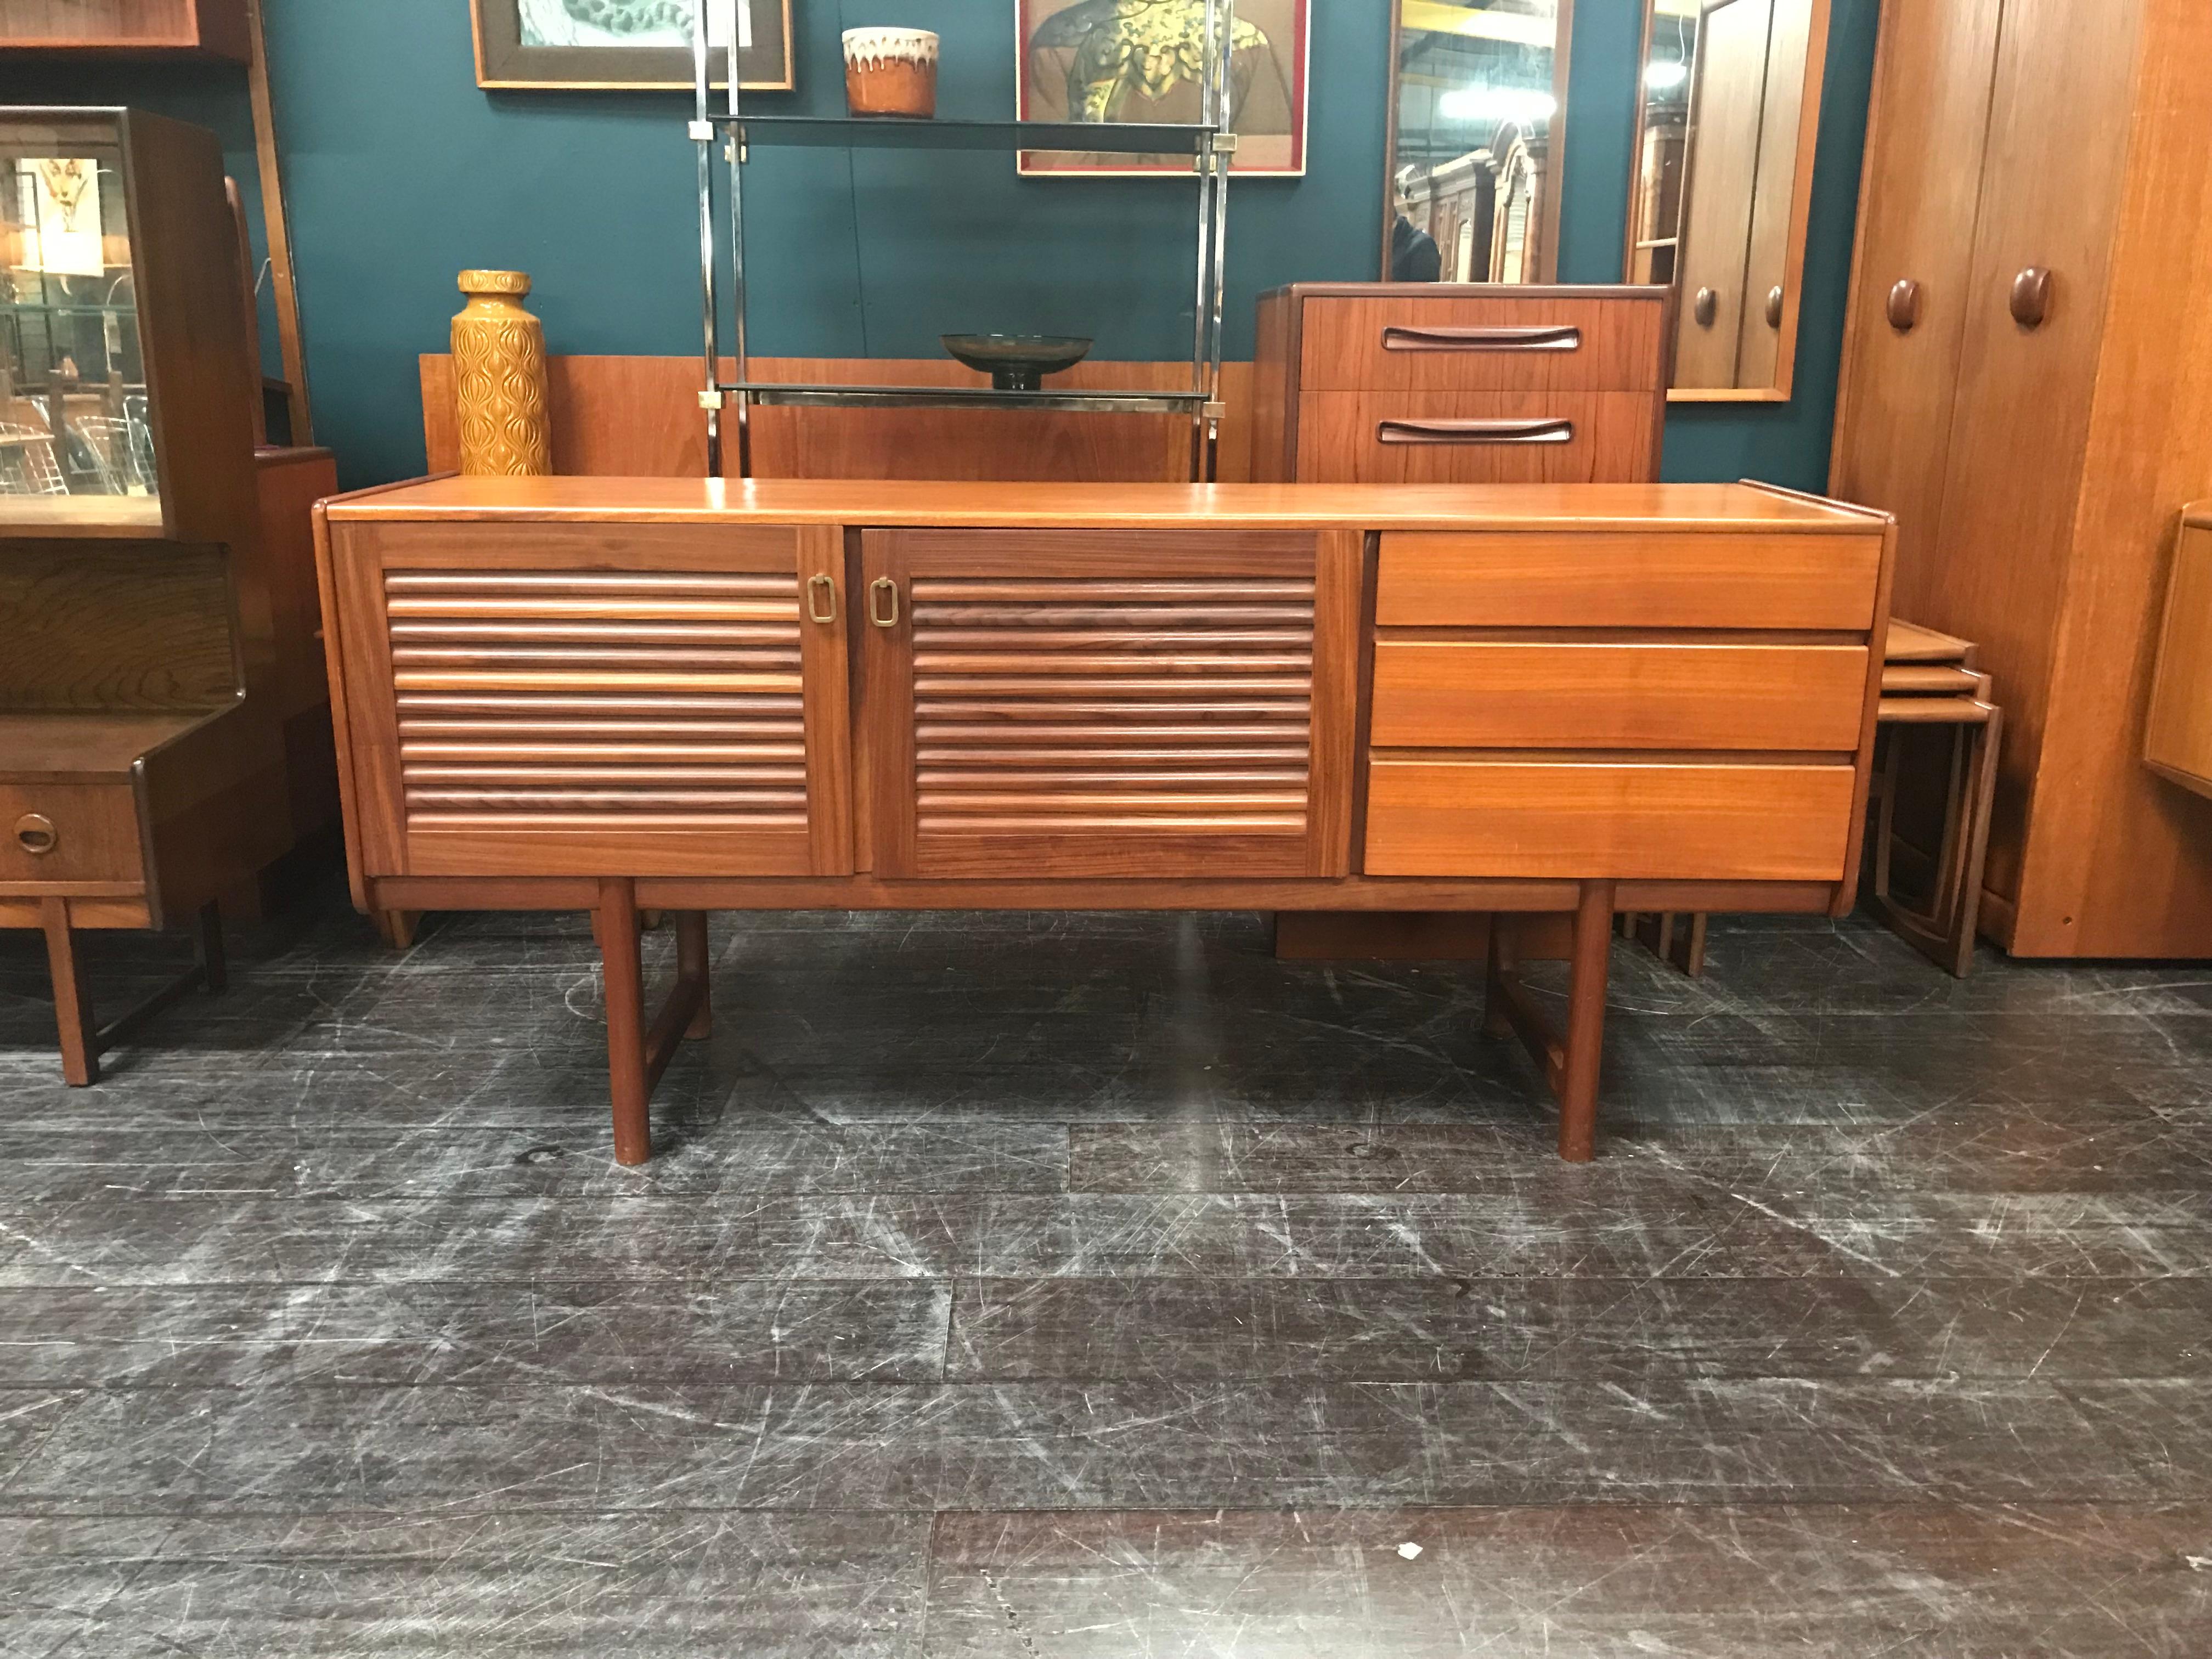 A vintage teak sideboard designed by Tom Robertson and manufactured by A.H. McIntosh of Kirkcaldy. This Classic piece of Scottish midcentury Furniture features extensive storage, with three drawers set to the side of a double cupboard. The sideboard